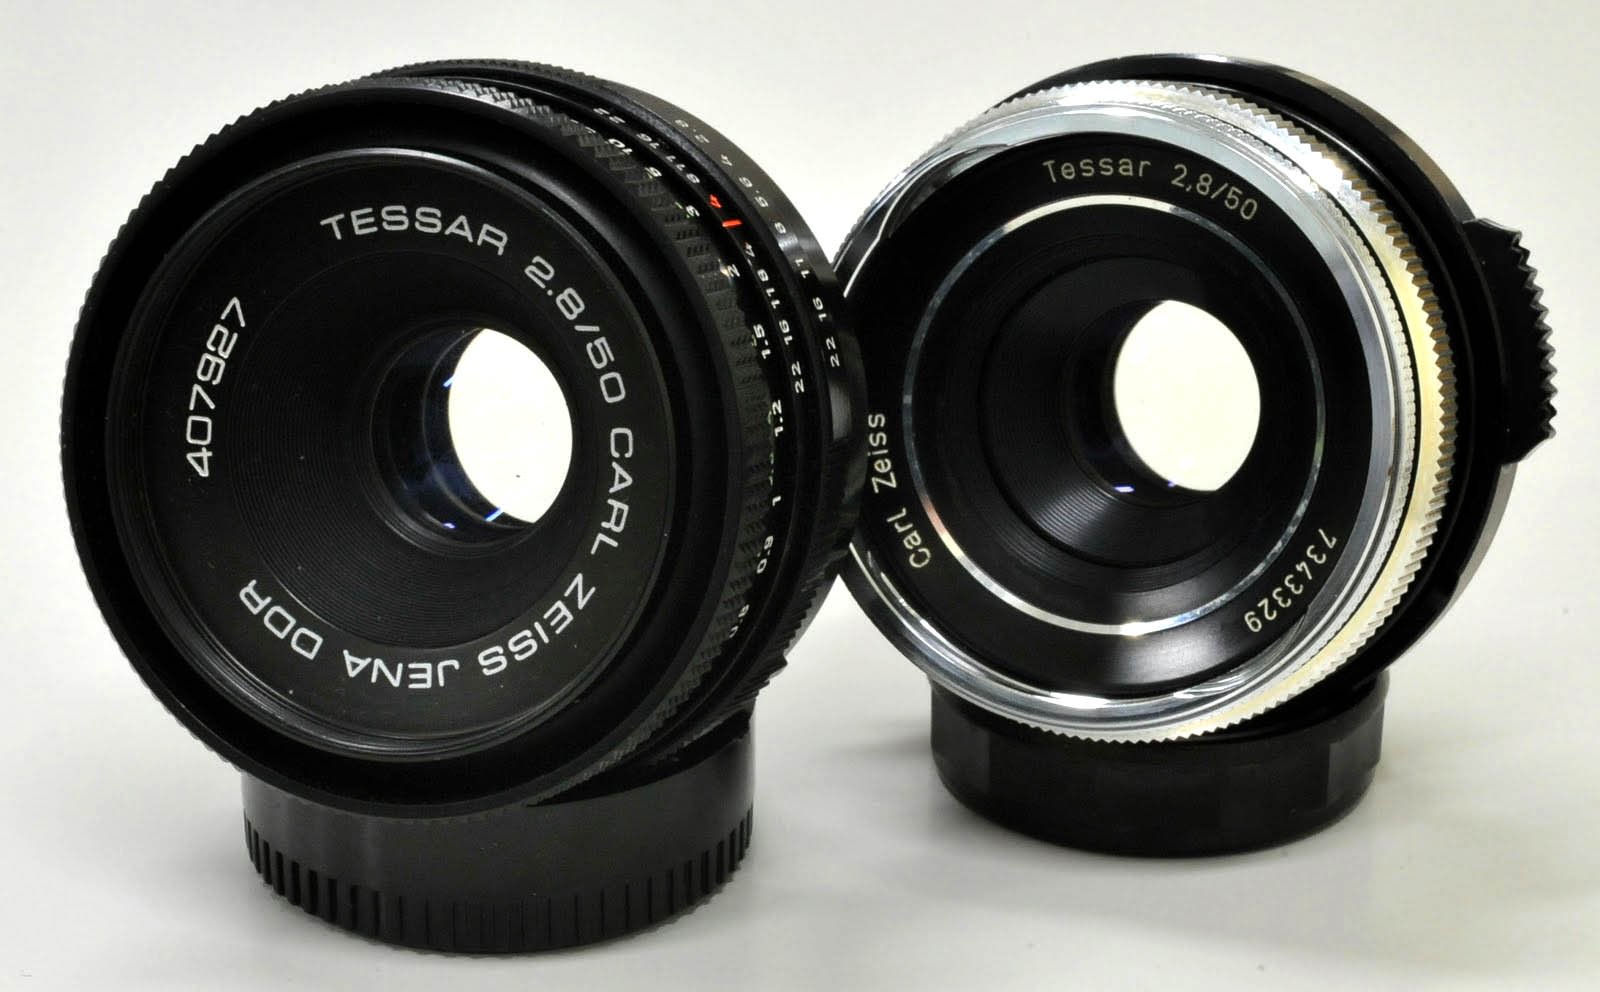 M42 MOUNT SPIRAL: Carl Zeiss Jena TESSAR 50mm/F2.8 and Carl Zeiss 